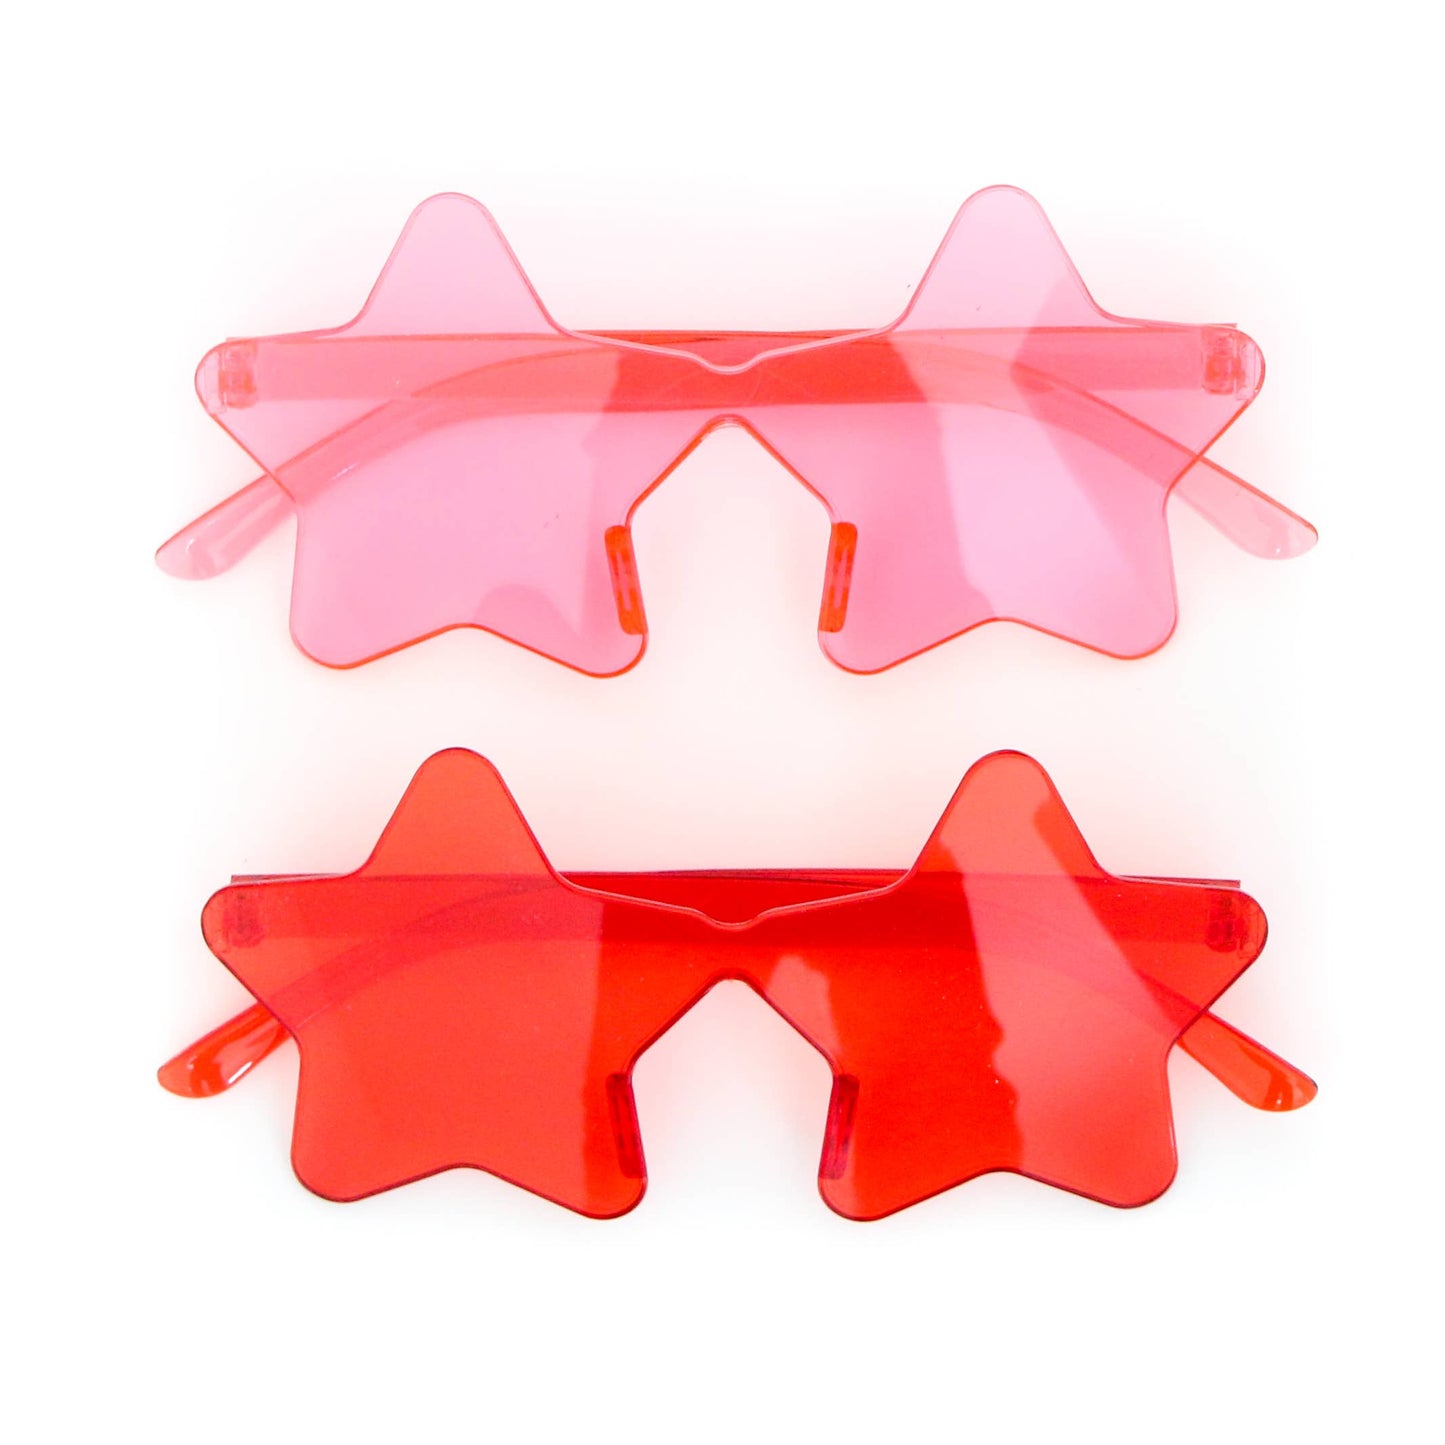 Red and pink star sunglasses